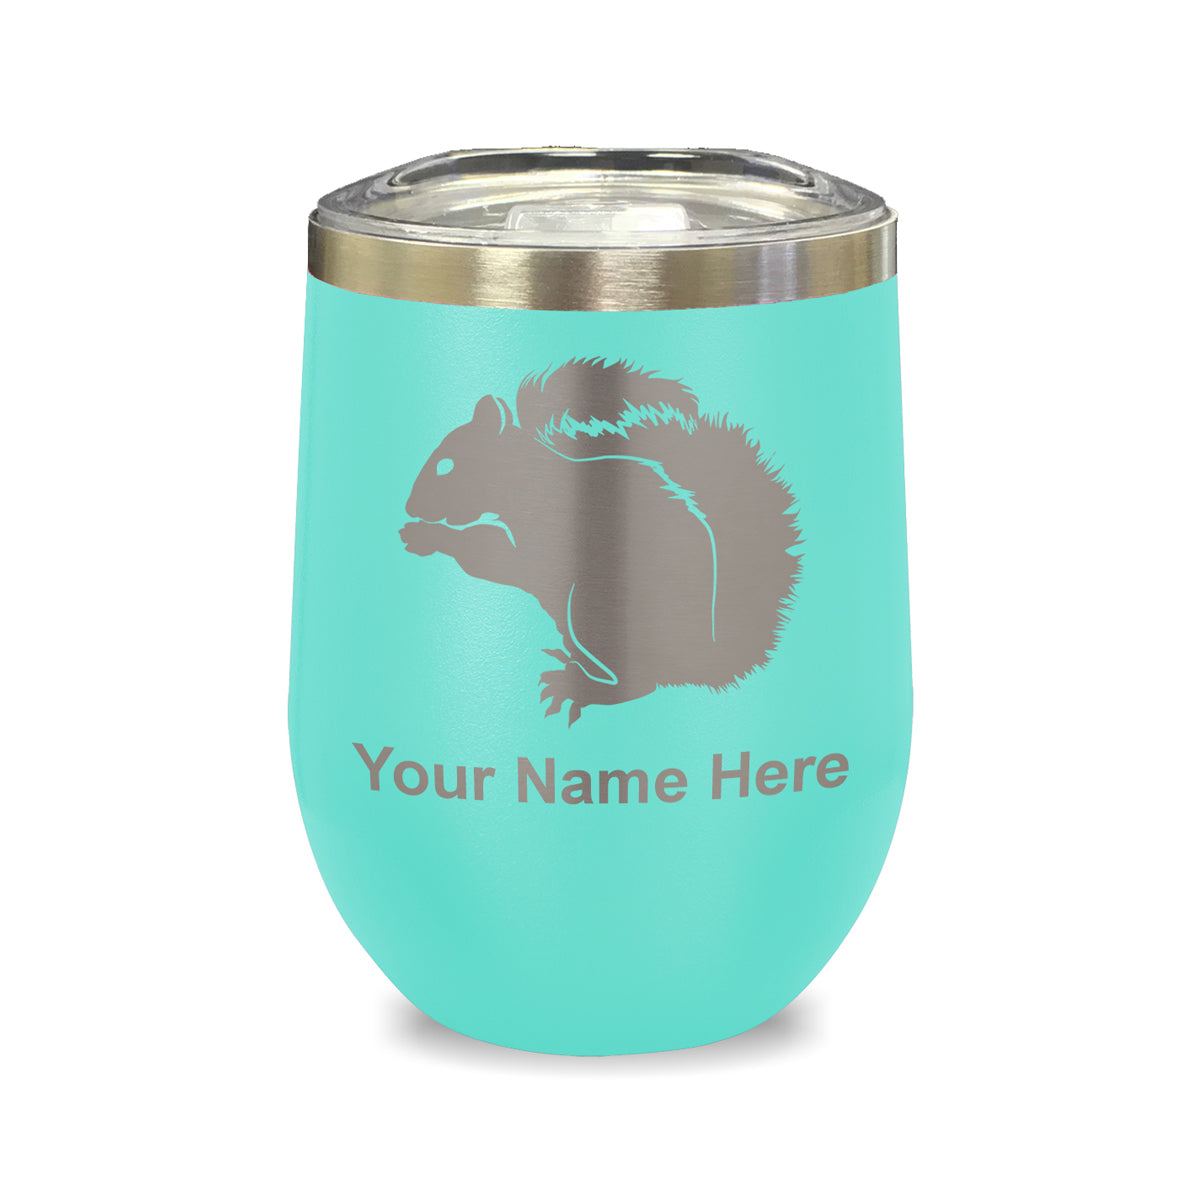 LaserGram Double Wall Stainless Steel Wine Glass, Squirrel, Personalized Engraving Included